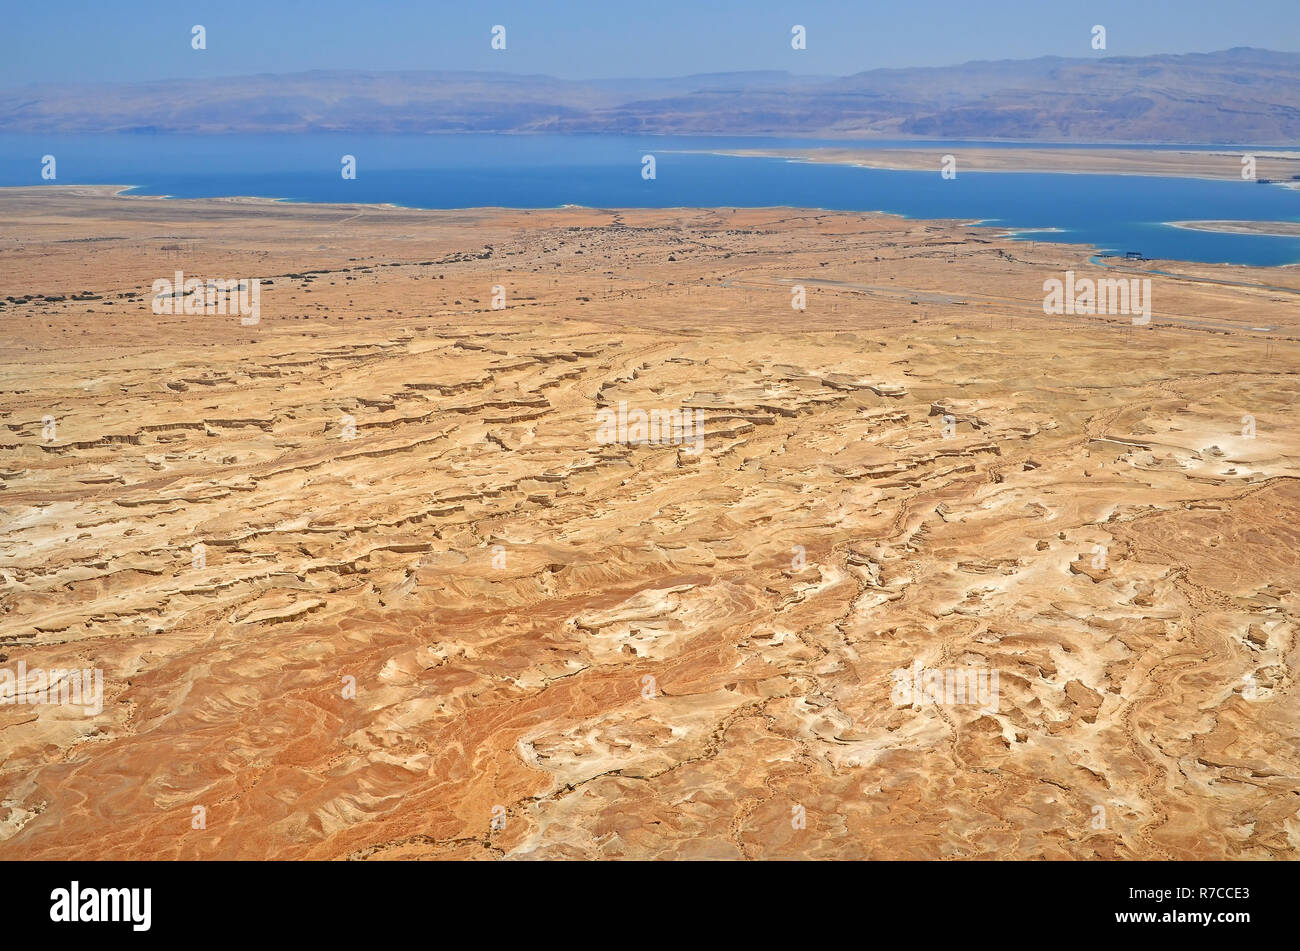 The Dead Sea - Image of the Week - Earth Watching